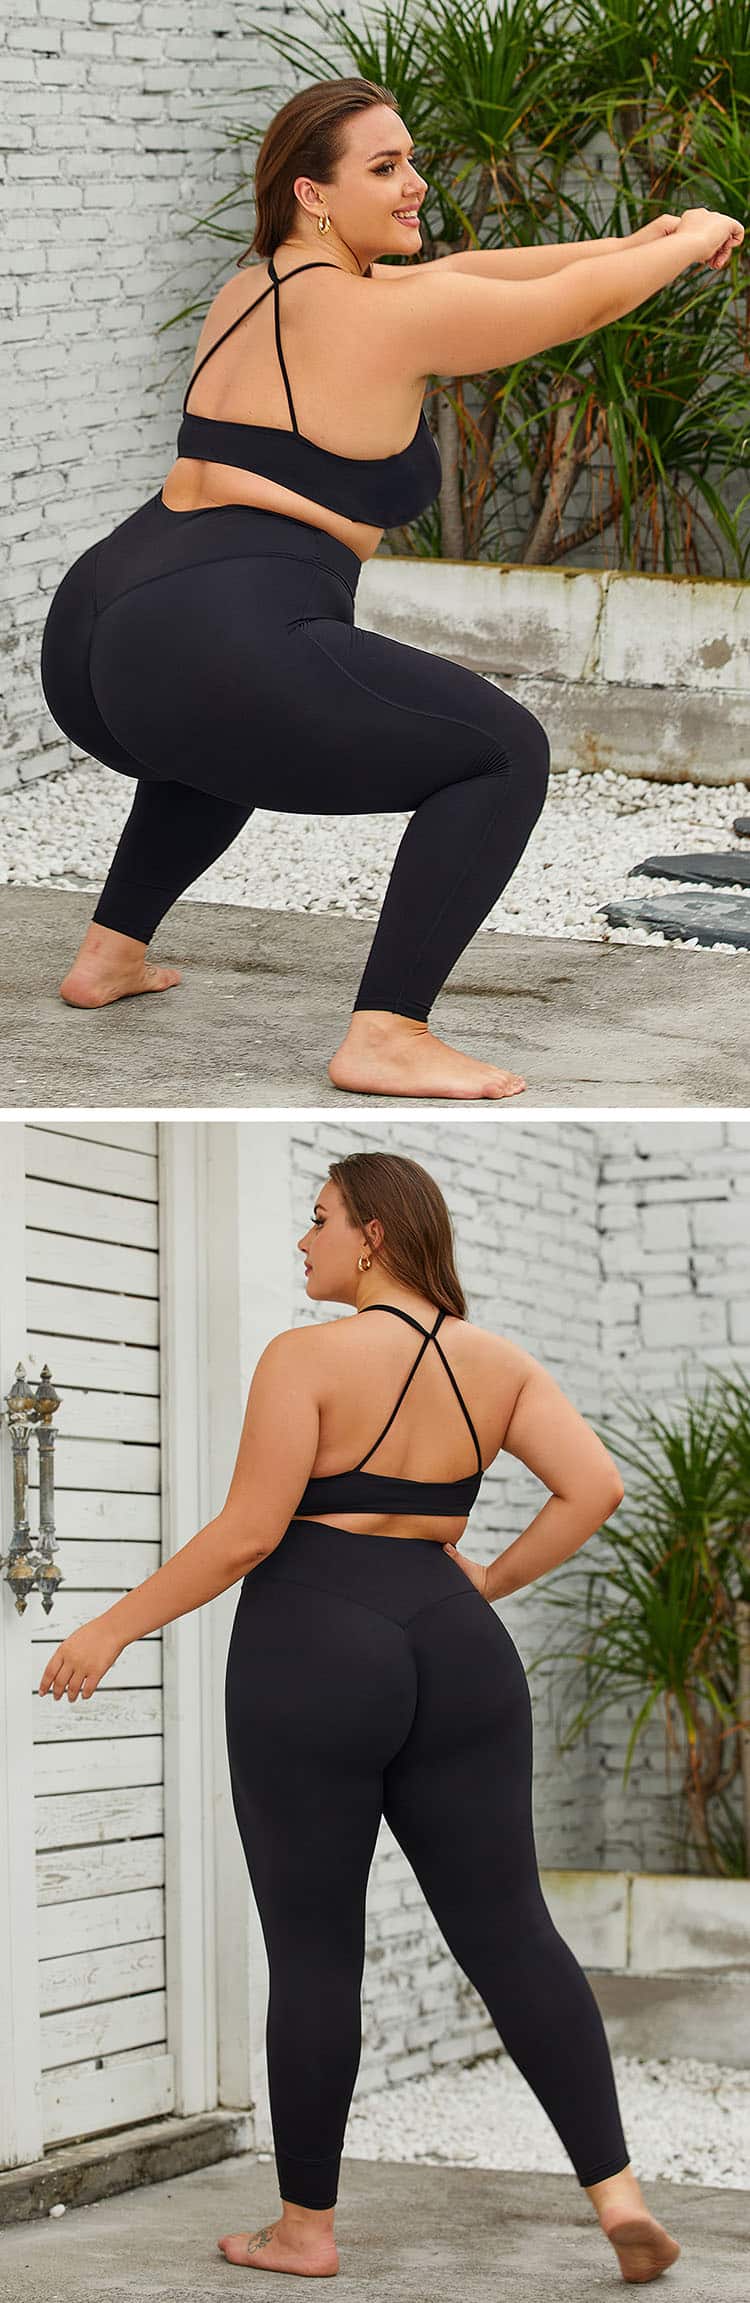 we have designed leggings that are comfortable, supportive and functional